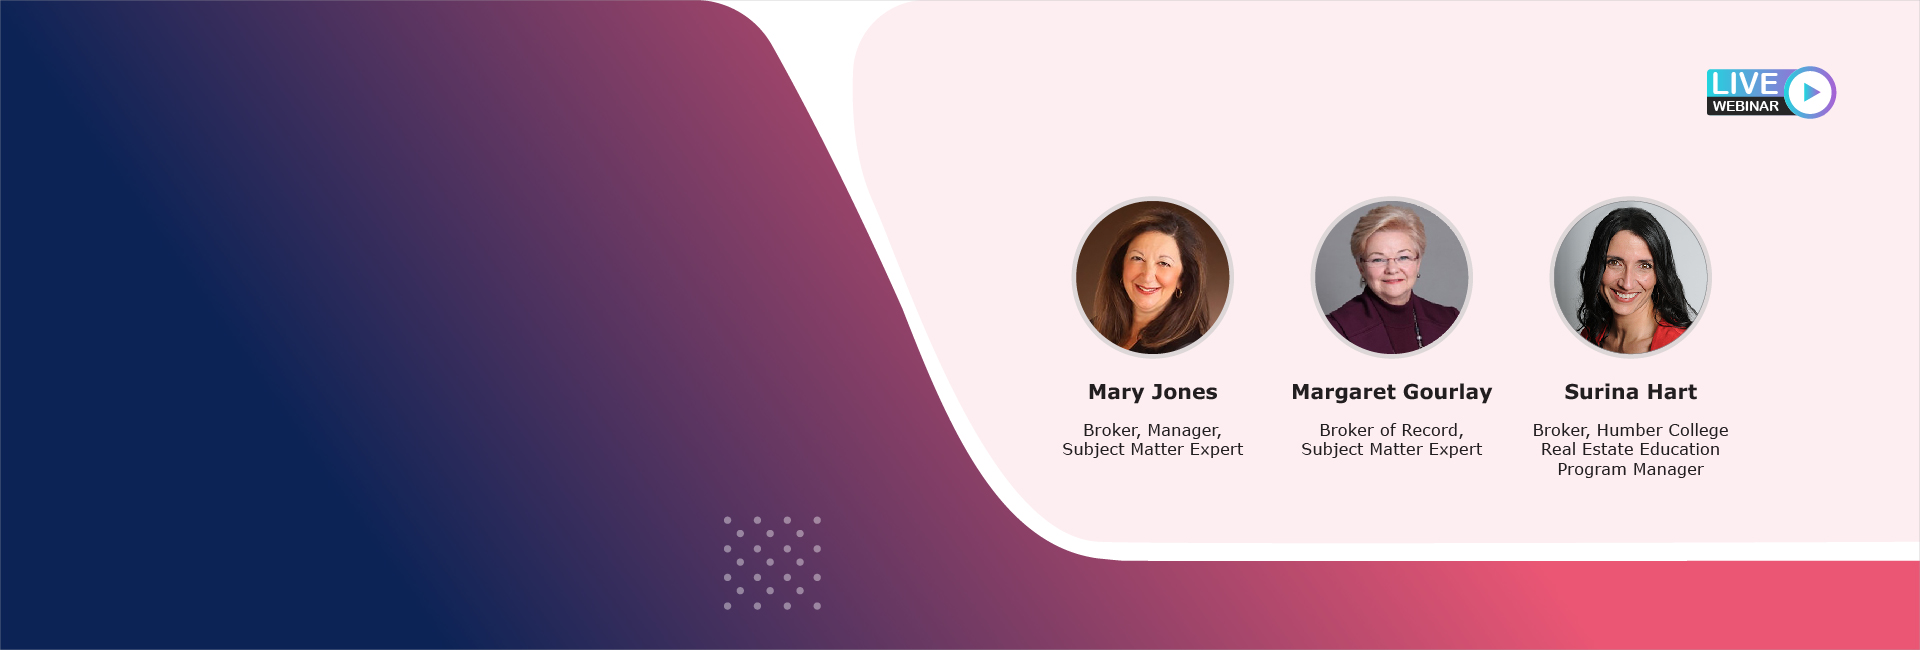 Career Conversations with Mary Jones, Margaret Gourlay, and Surina Hart